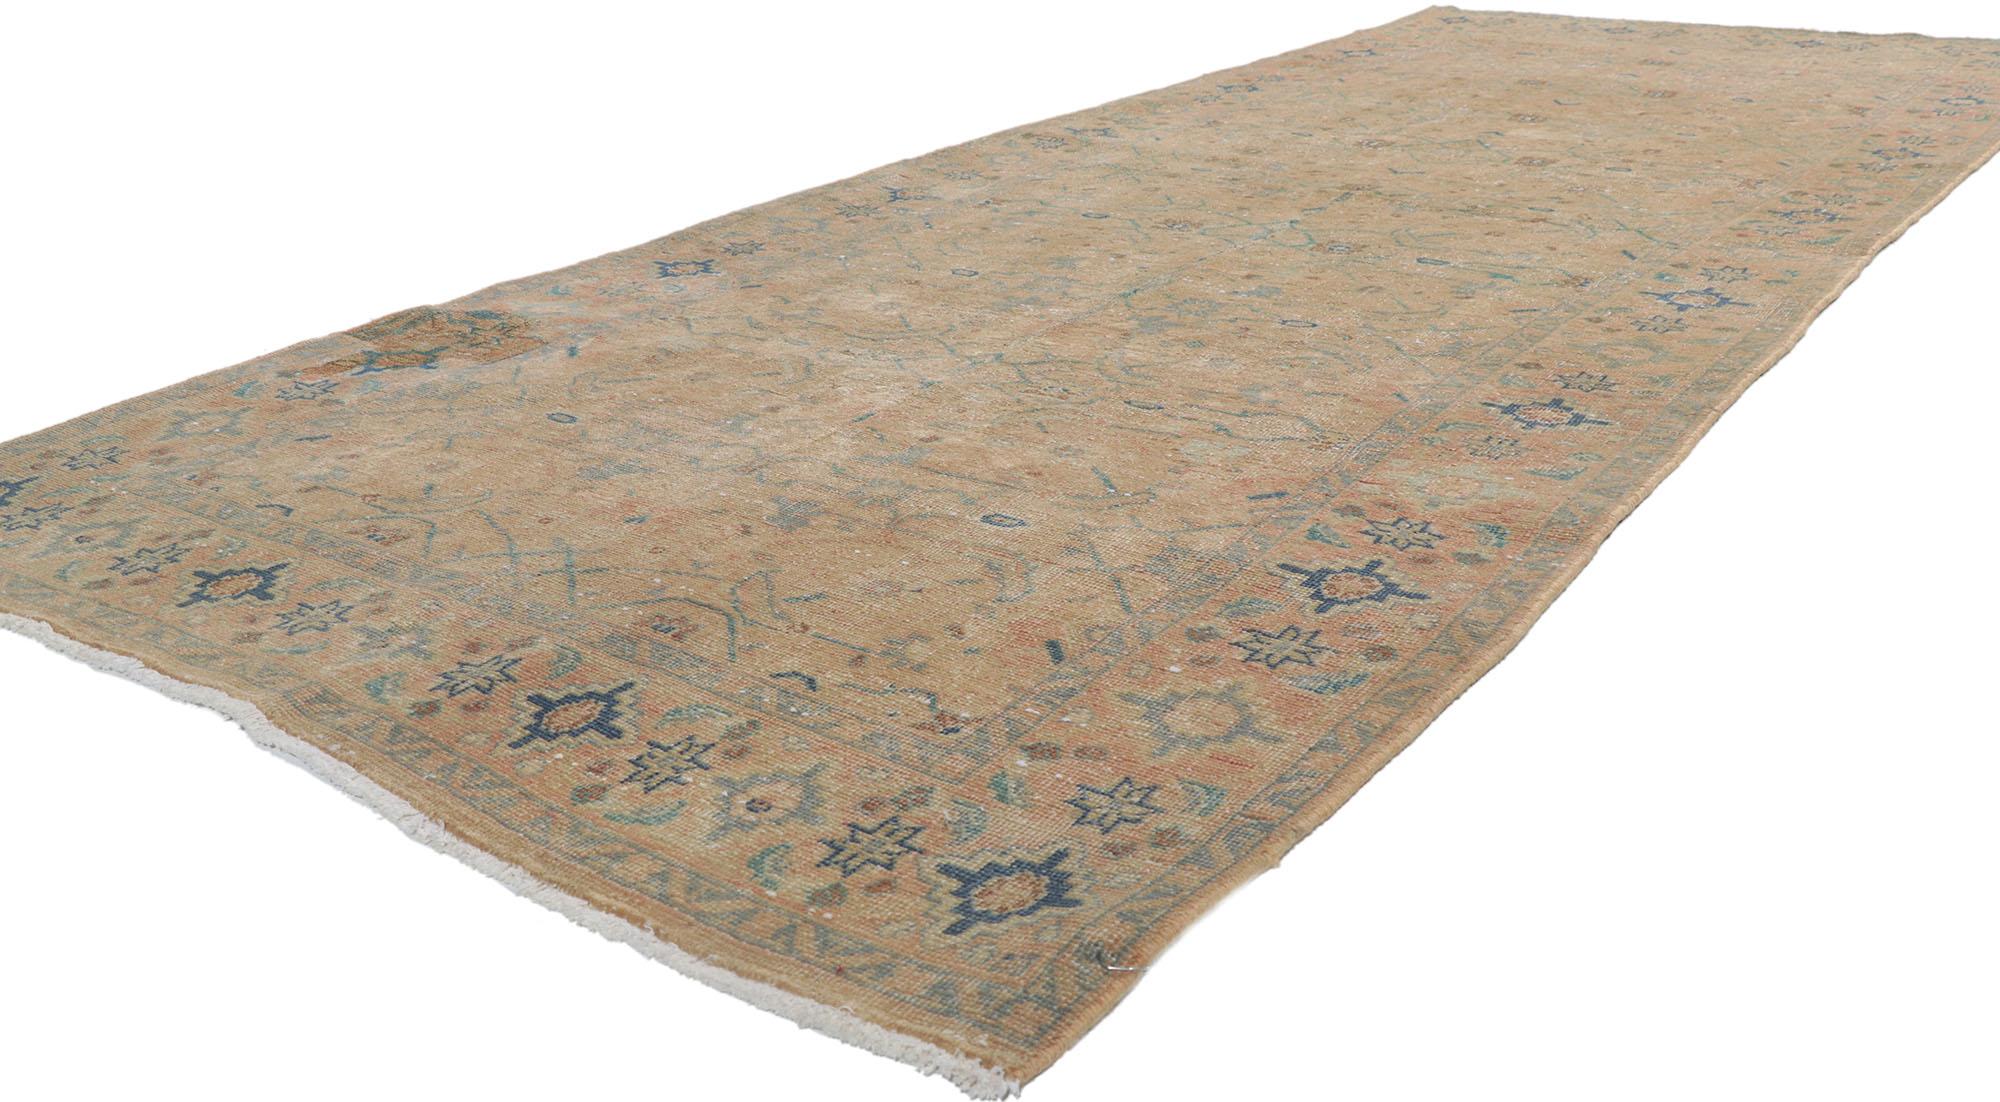 61012 Distressed Vintage Persian Tabriz Rug, 04'02 x 10'11.
Get ready for an enthralling adventure as you get swept away by the warm and comforting embrace of this meticulously hand-knotted wool distressed vintage Persian Tabriz rug. Immerse